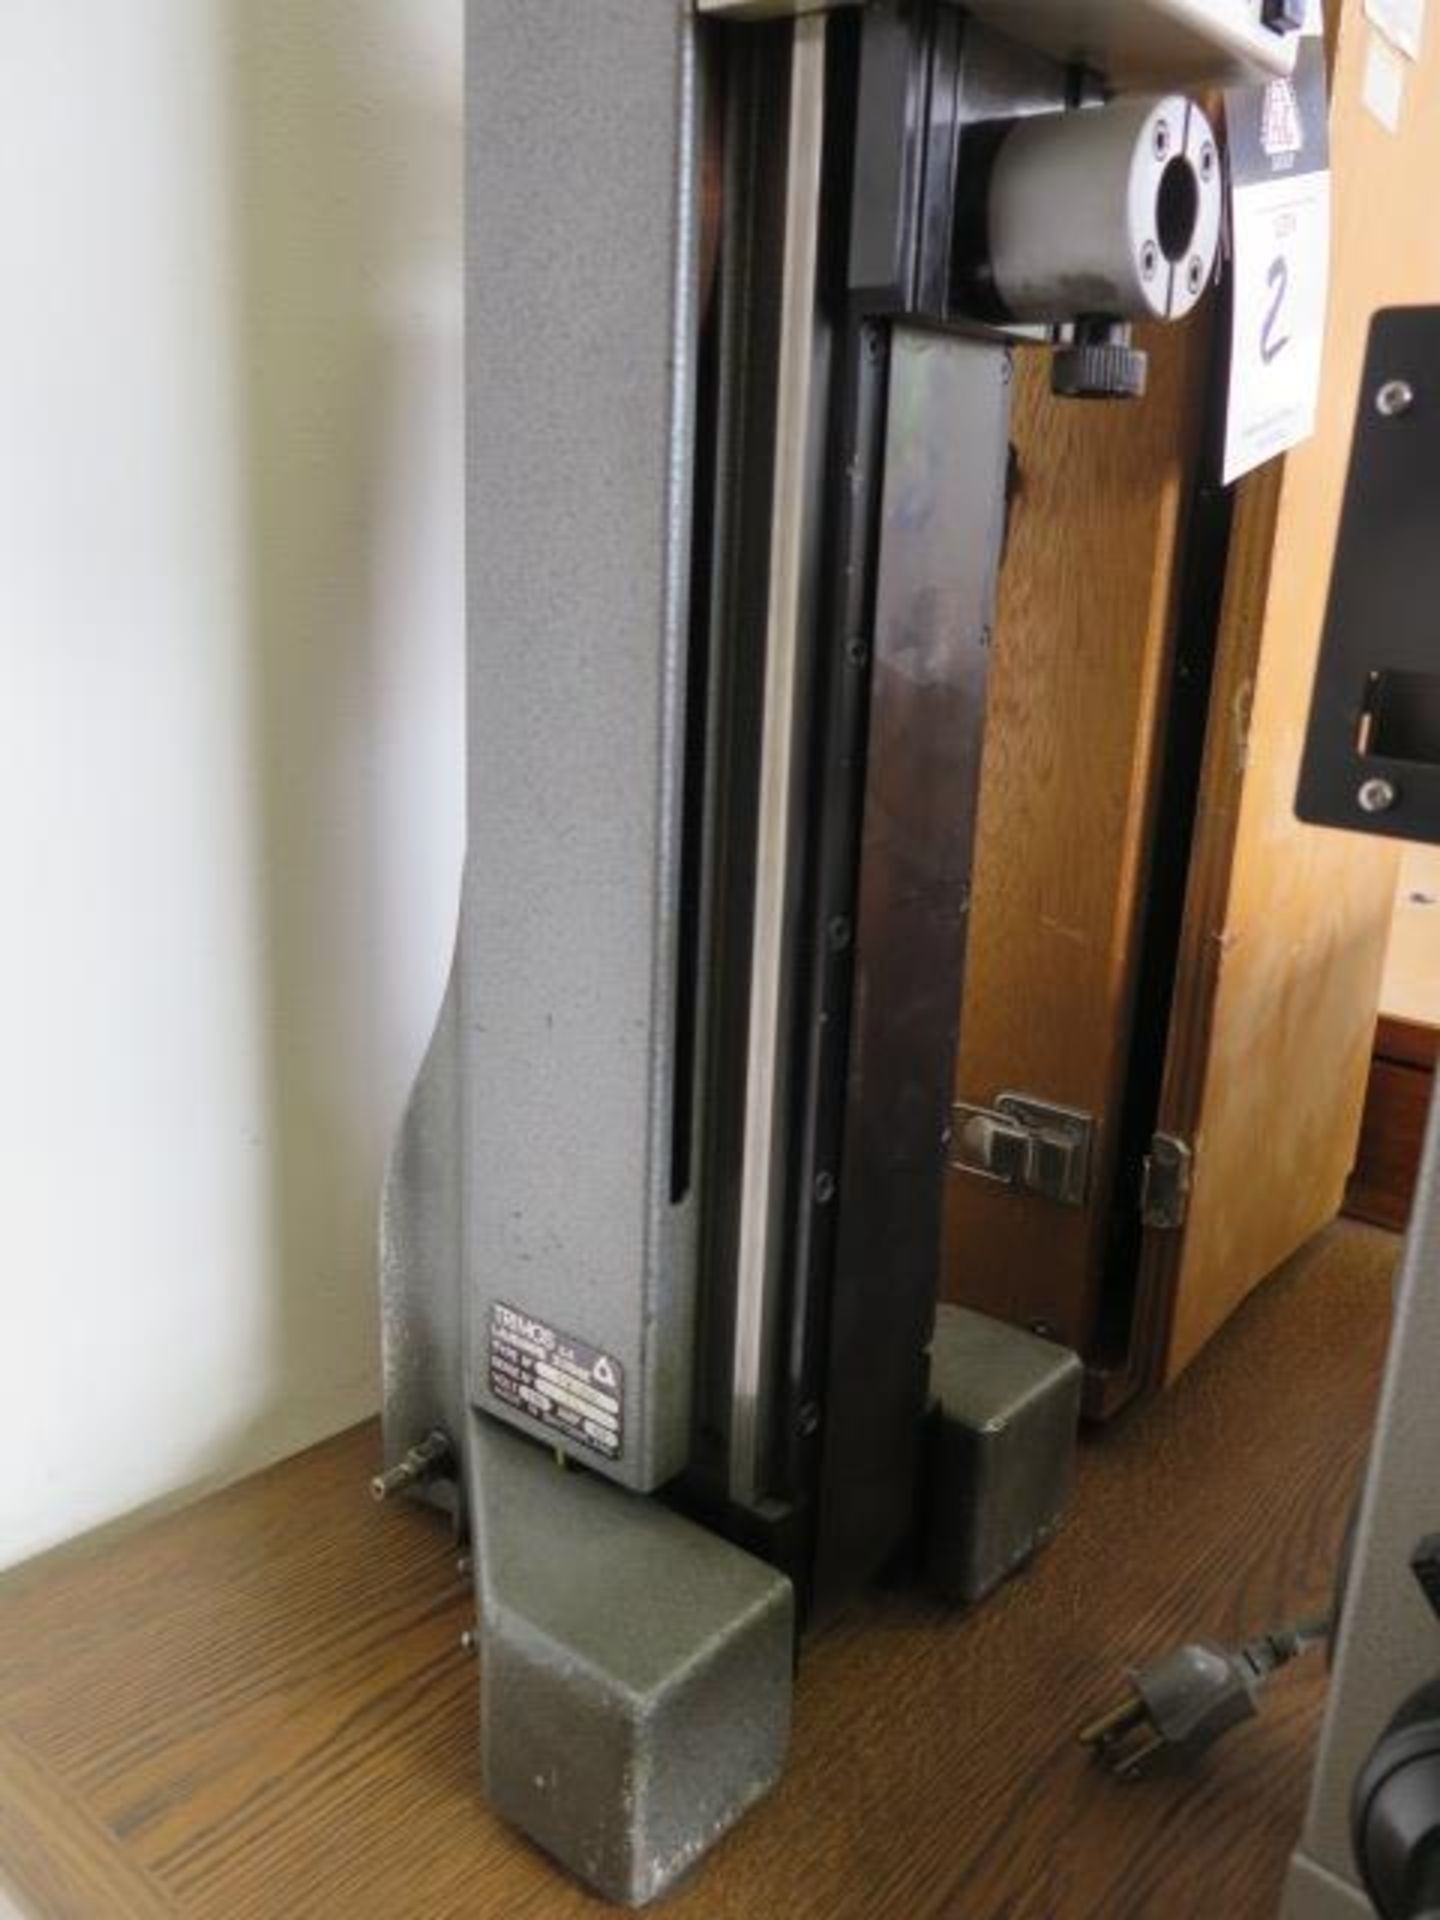 Fowler Trimos "Vertical 500" 19" Digital Height Gage (SOLD AS-IS - NO WARRANTY) - Image 2 of 8